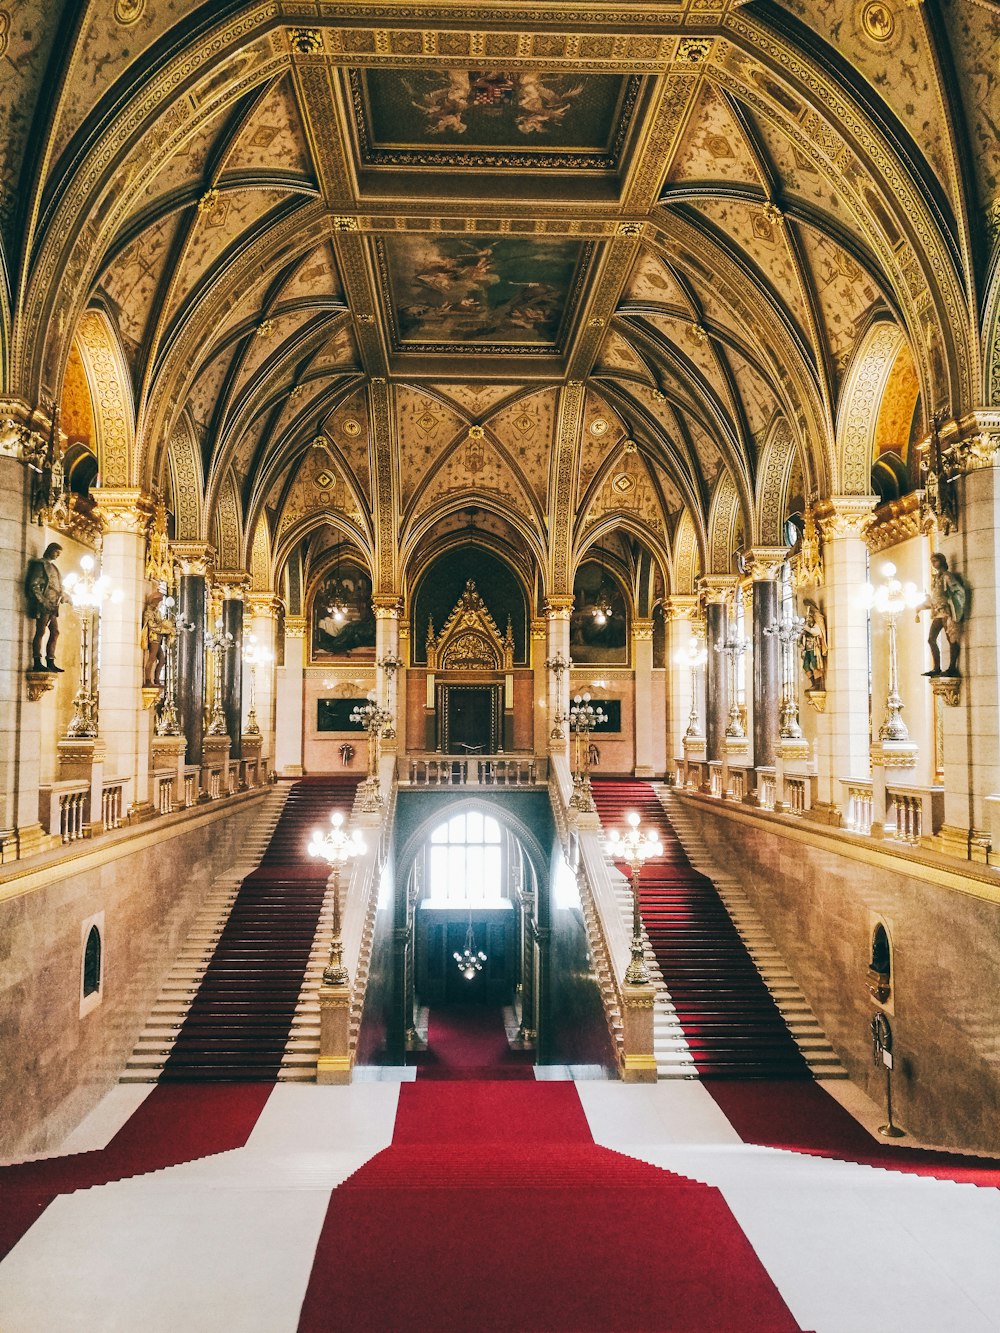 interior building with red carpets